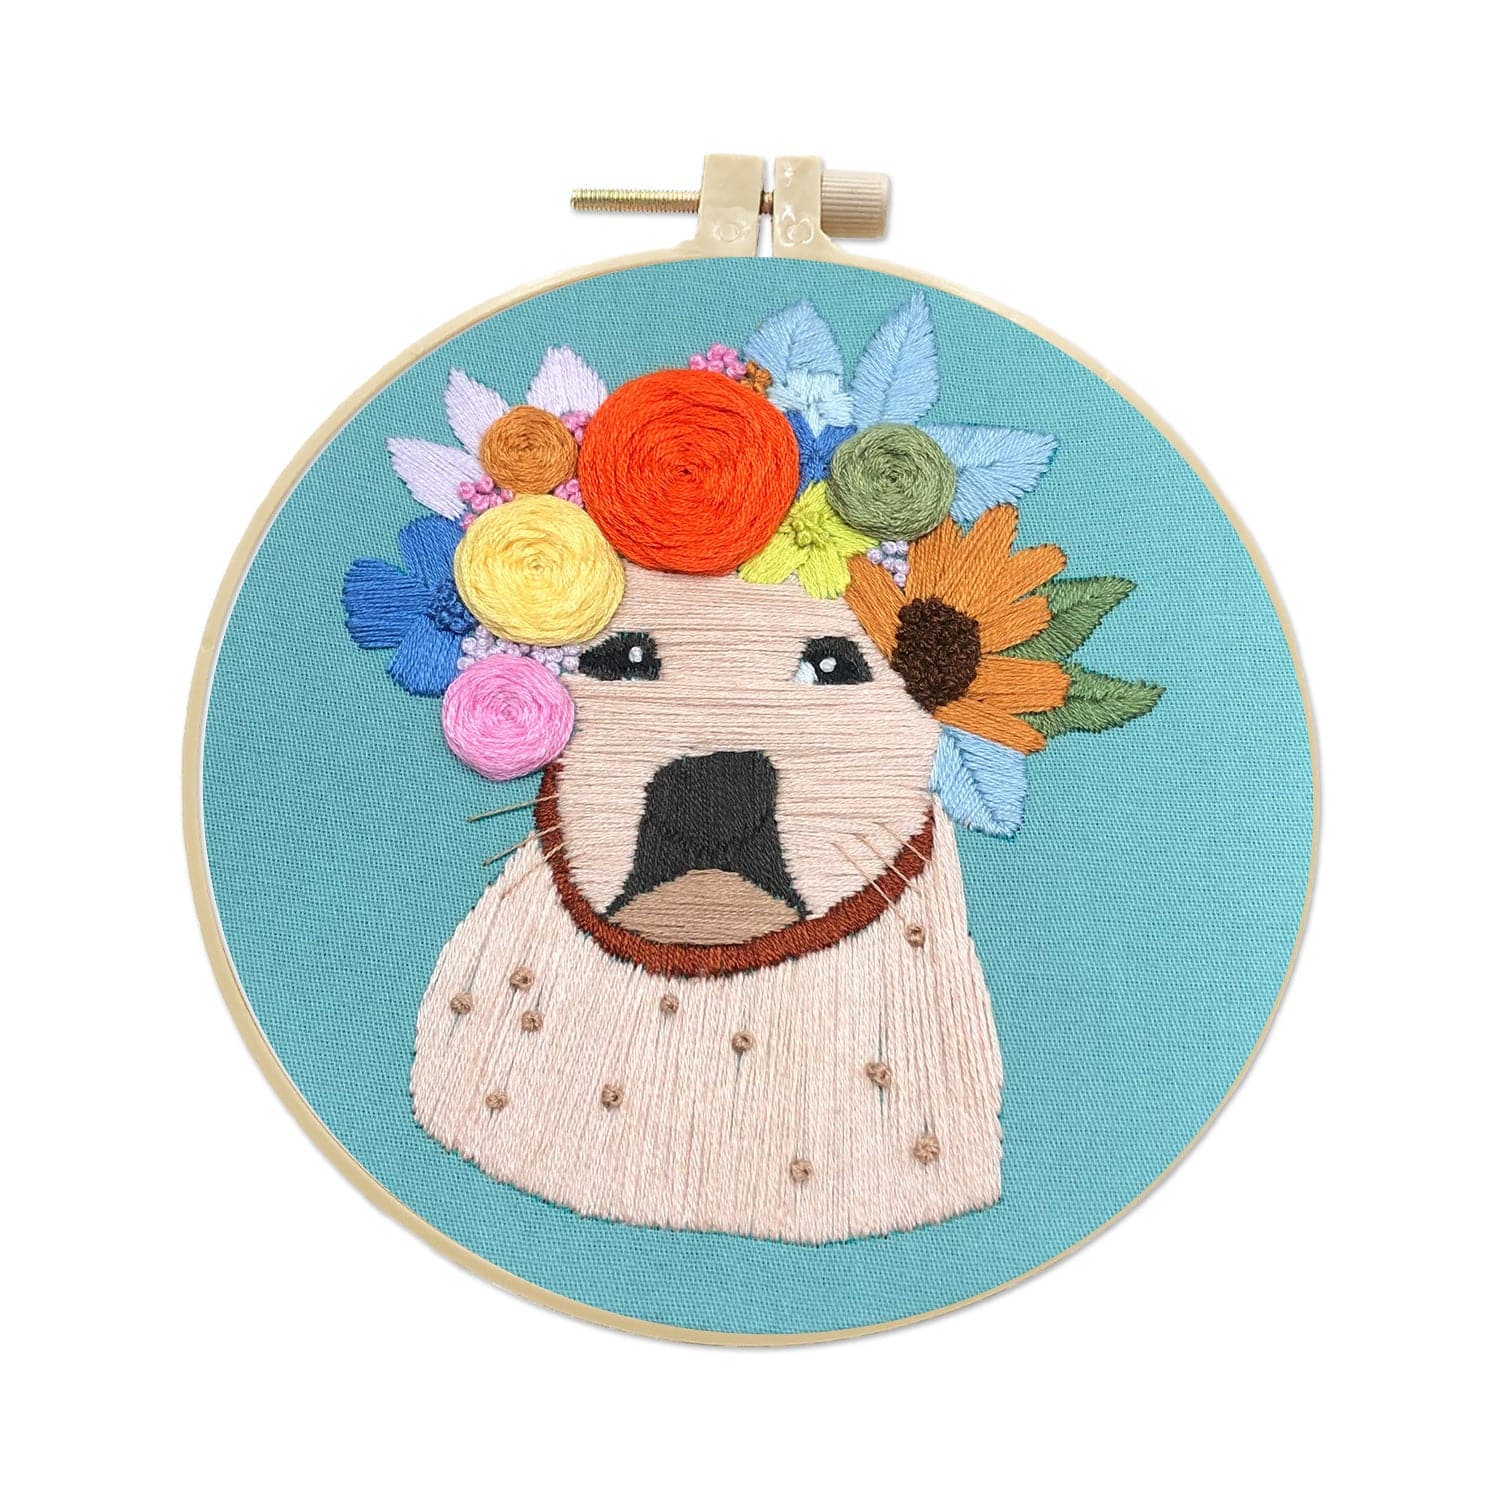 "Dog in a Garland" - Embroidery ktclubs.com